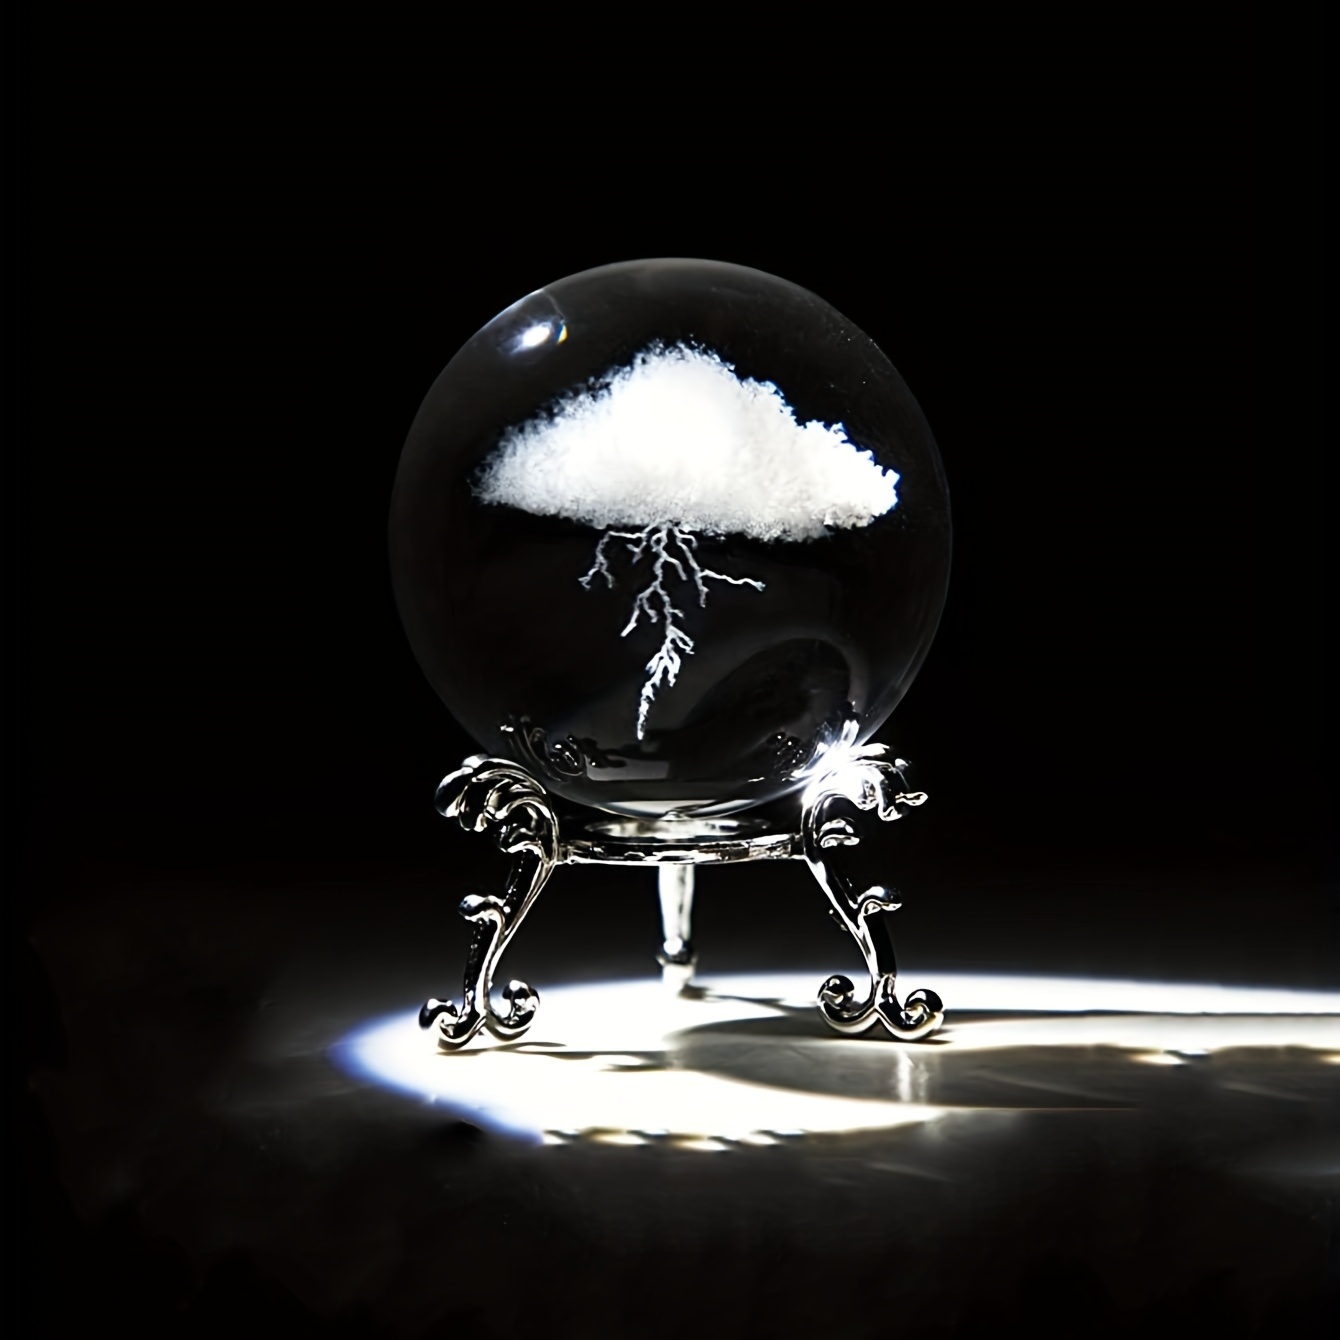 

1pc Thunder Cloud Round Holiday Gift Desktop Home Creative Crystal Ball Small Ornaments, Living Room Bedroom Decoration Crafts, Home Decor, Christmas Gift